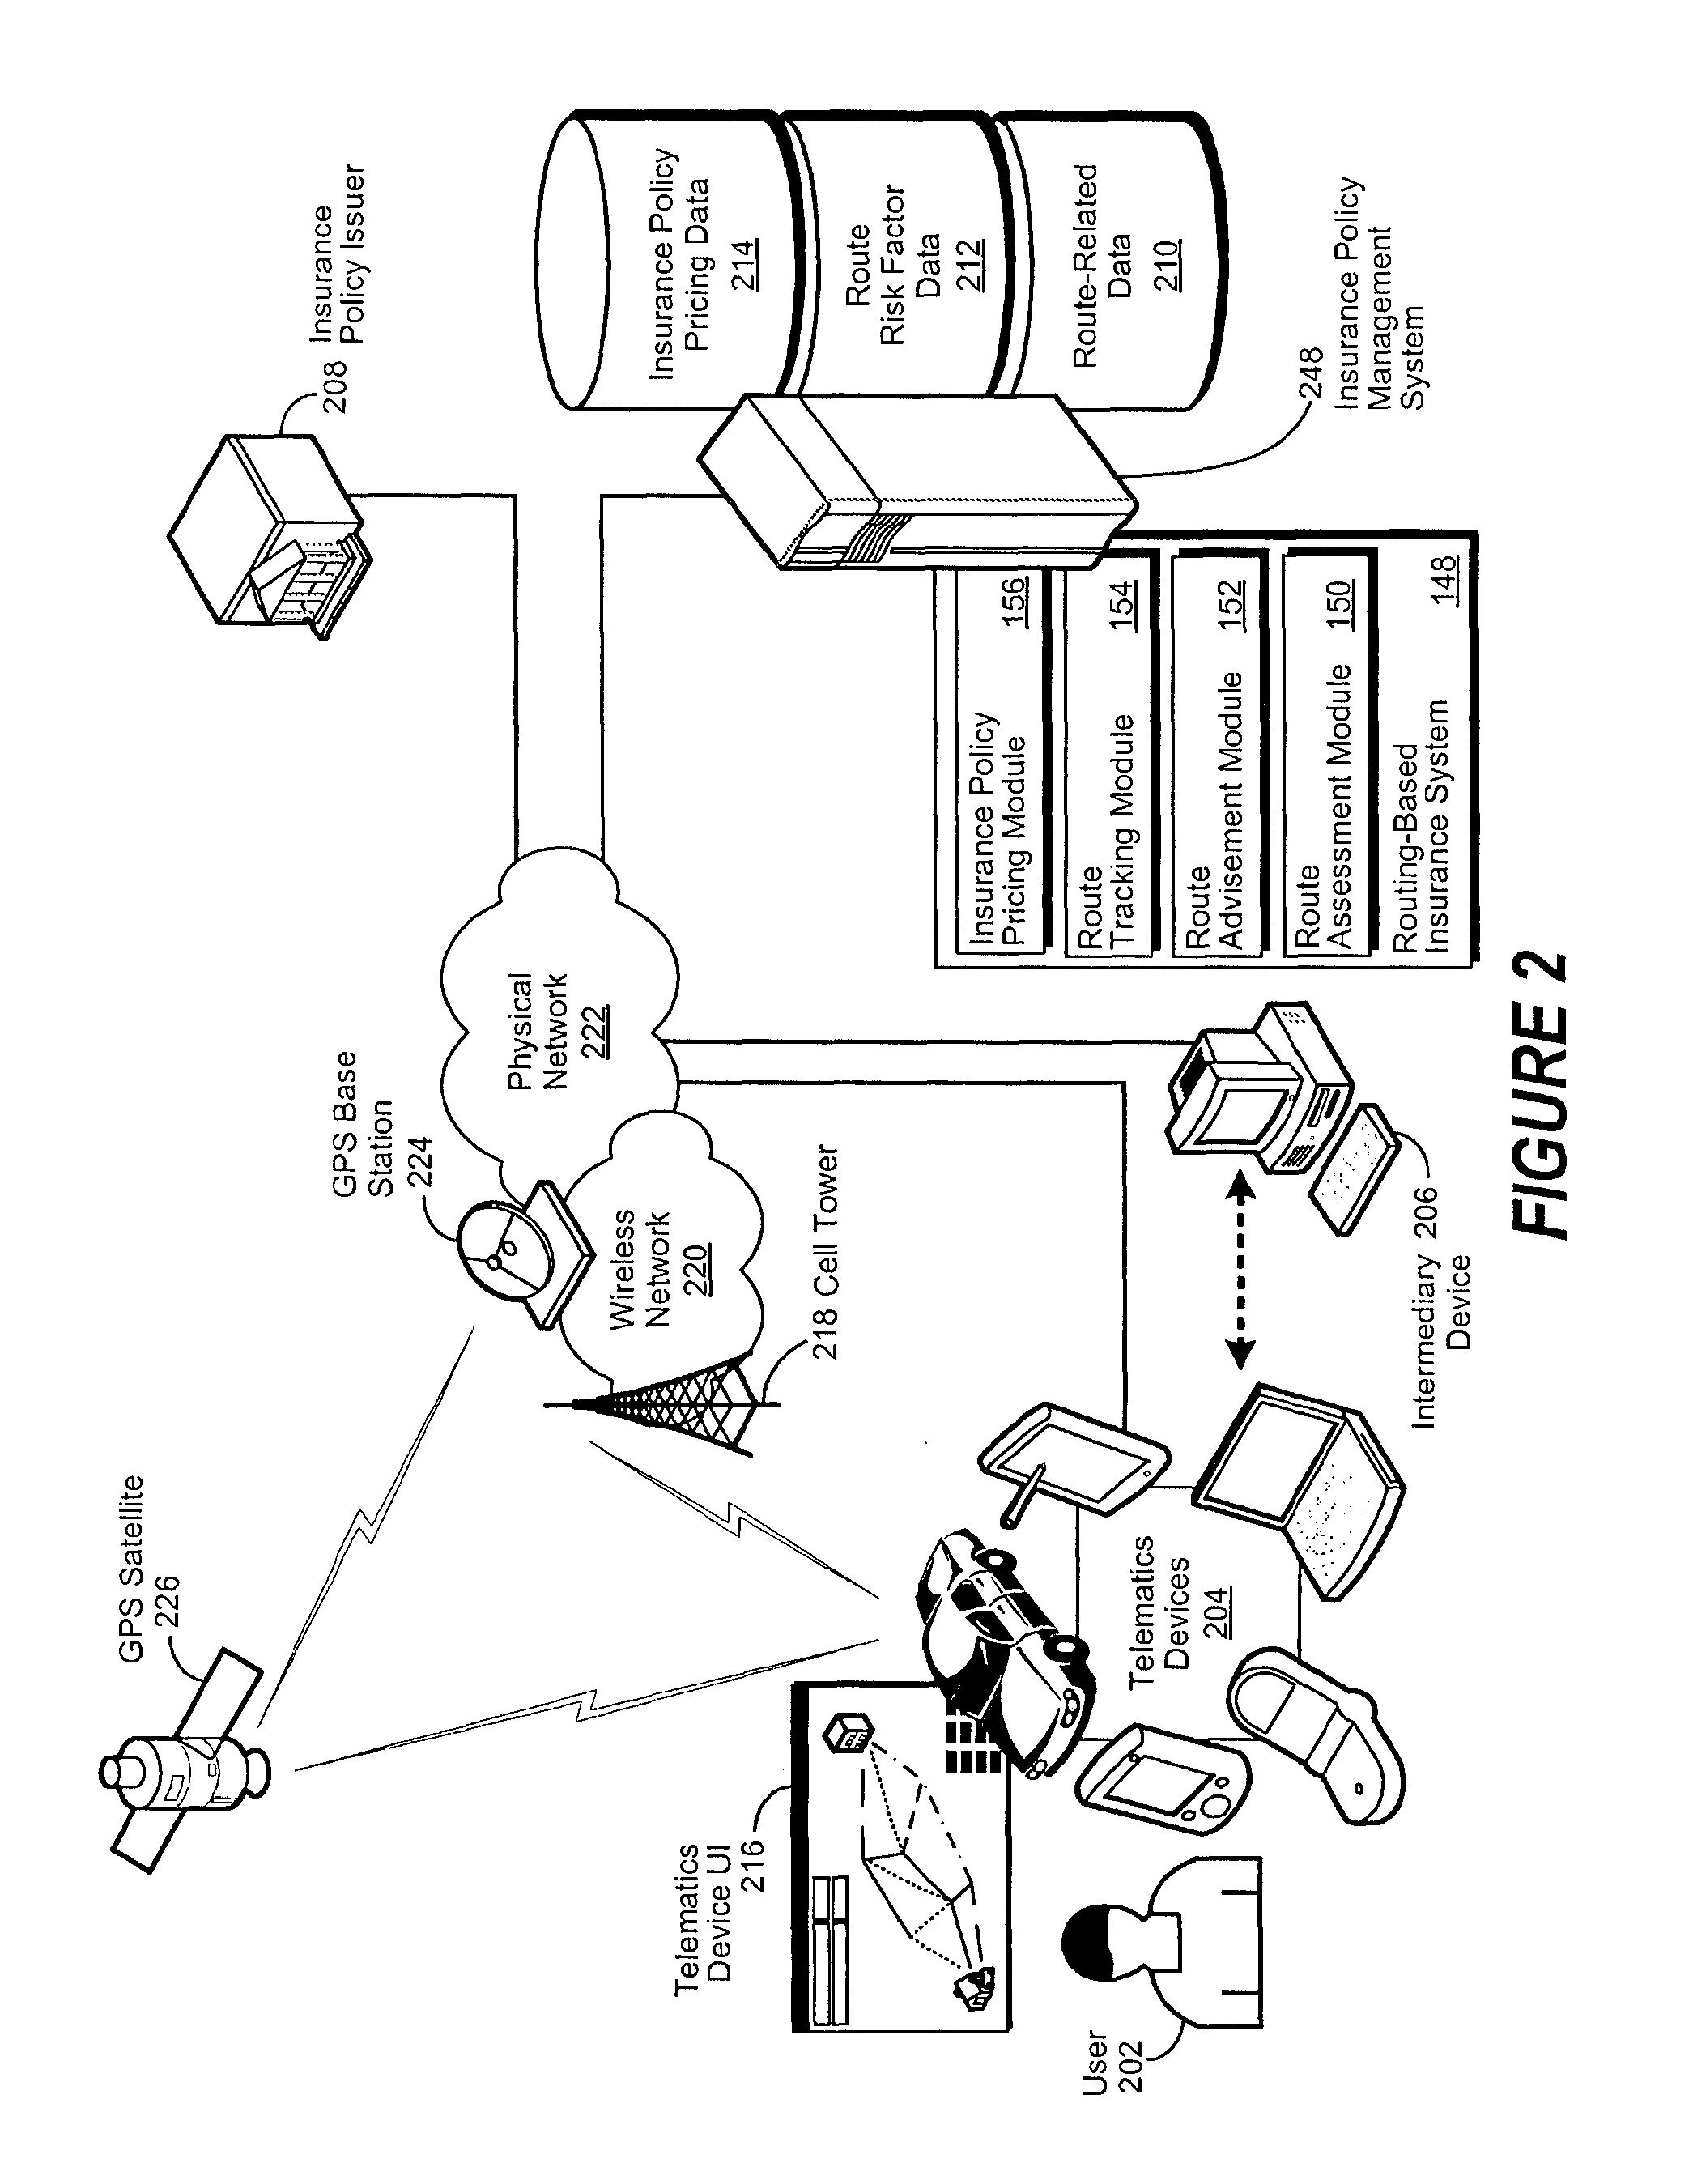 Systems and methods for real-time driving risk prediction and route recommendation